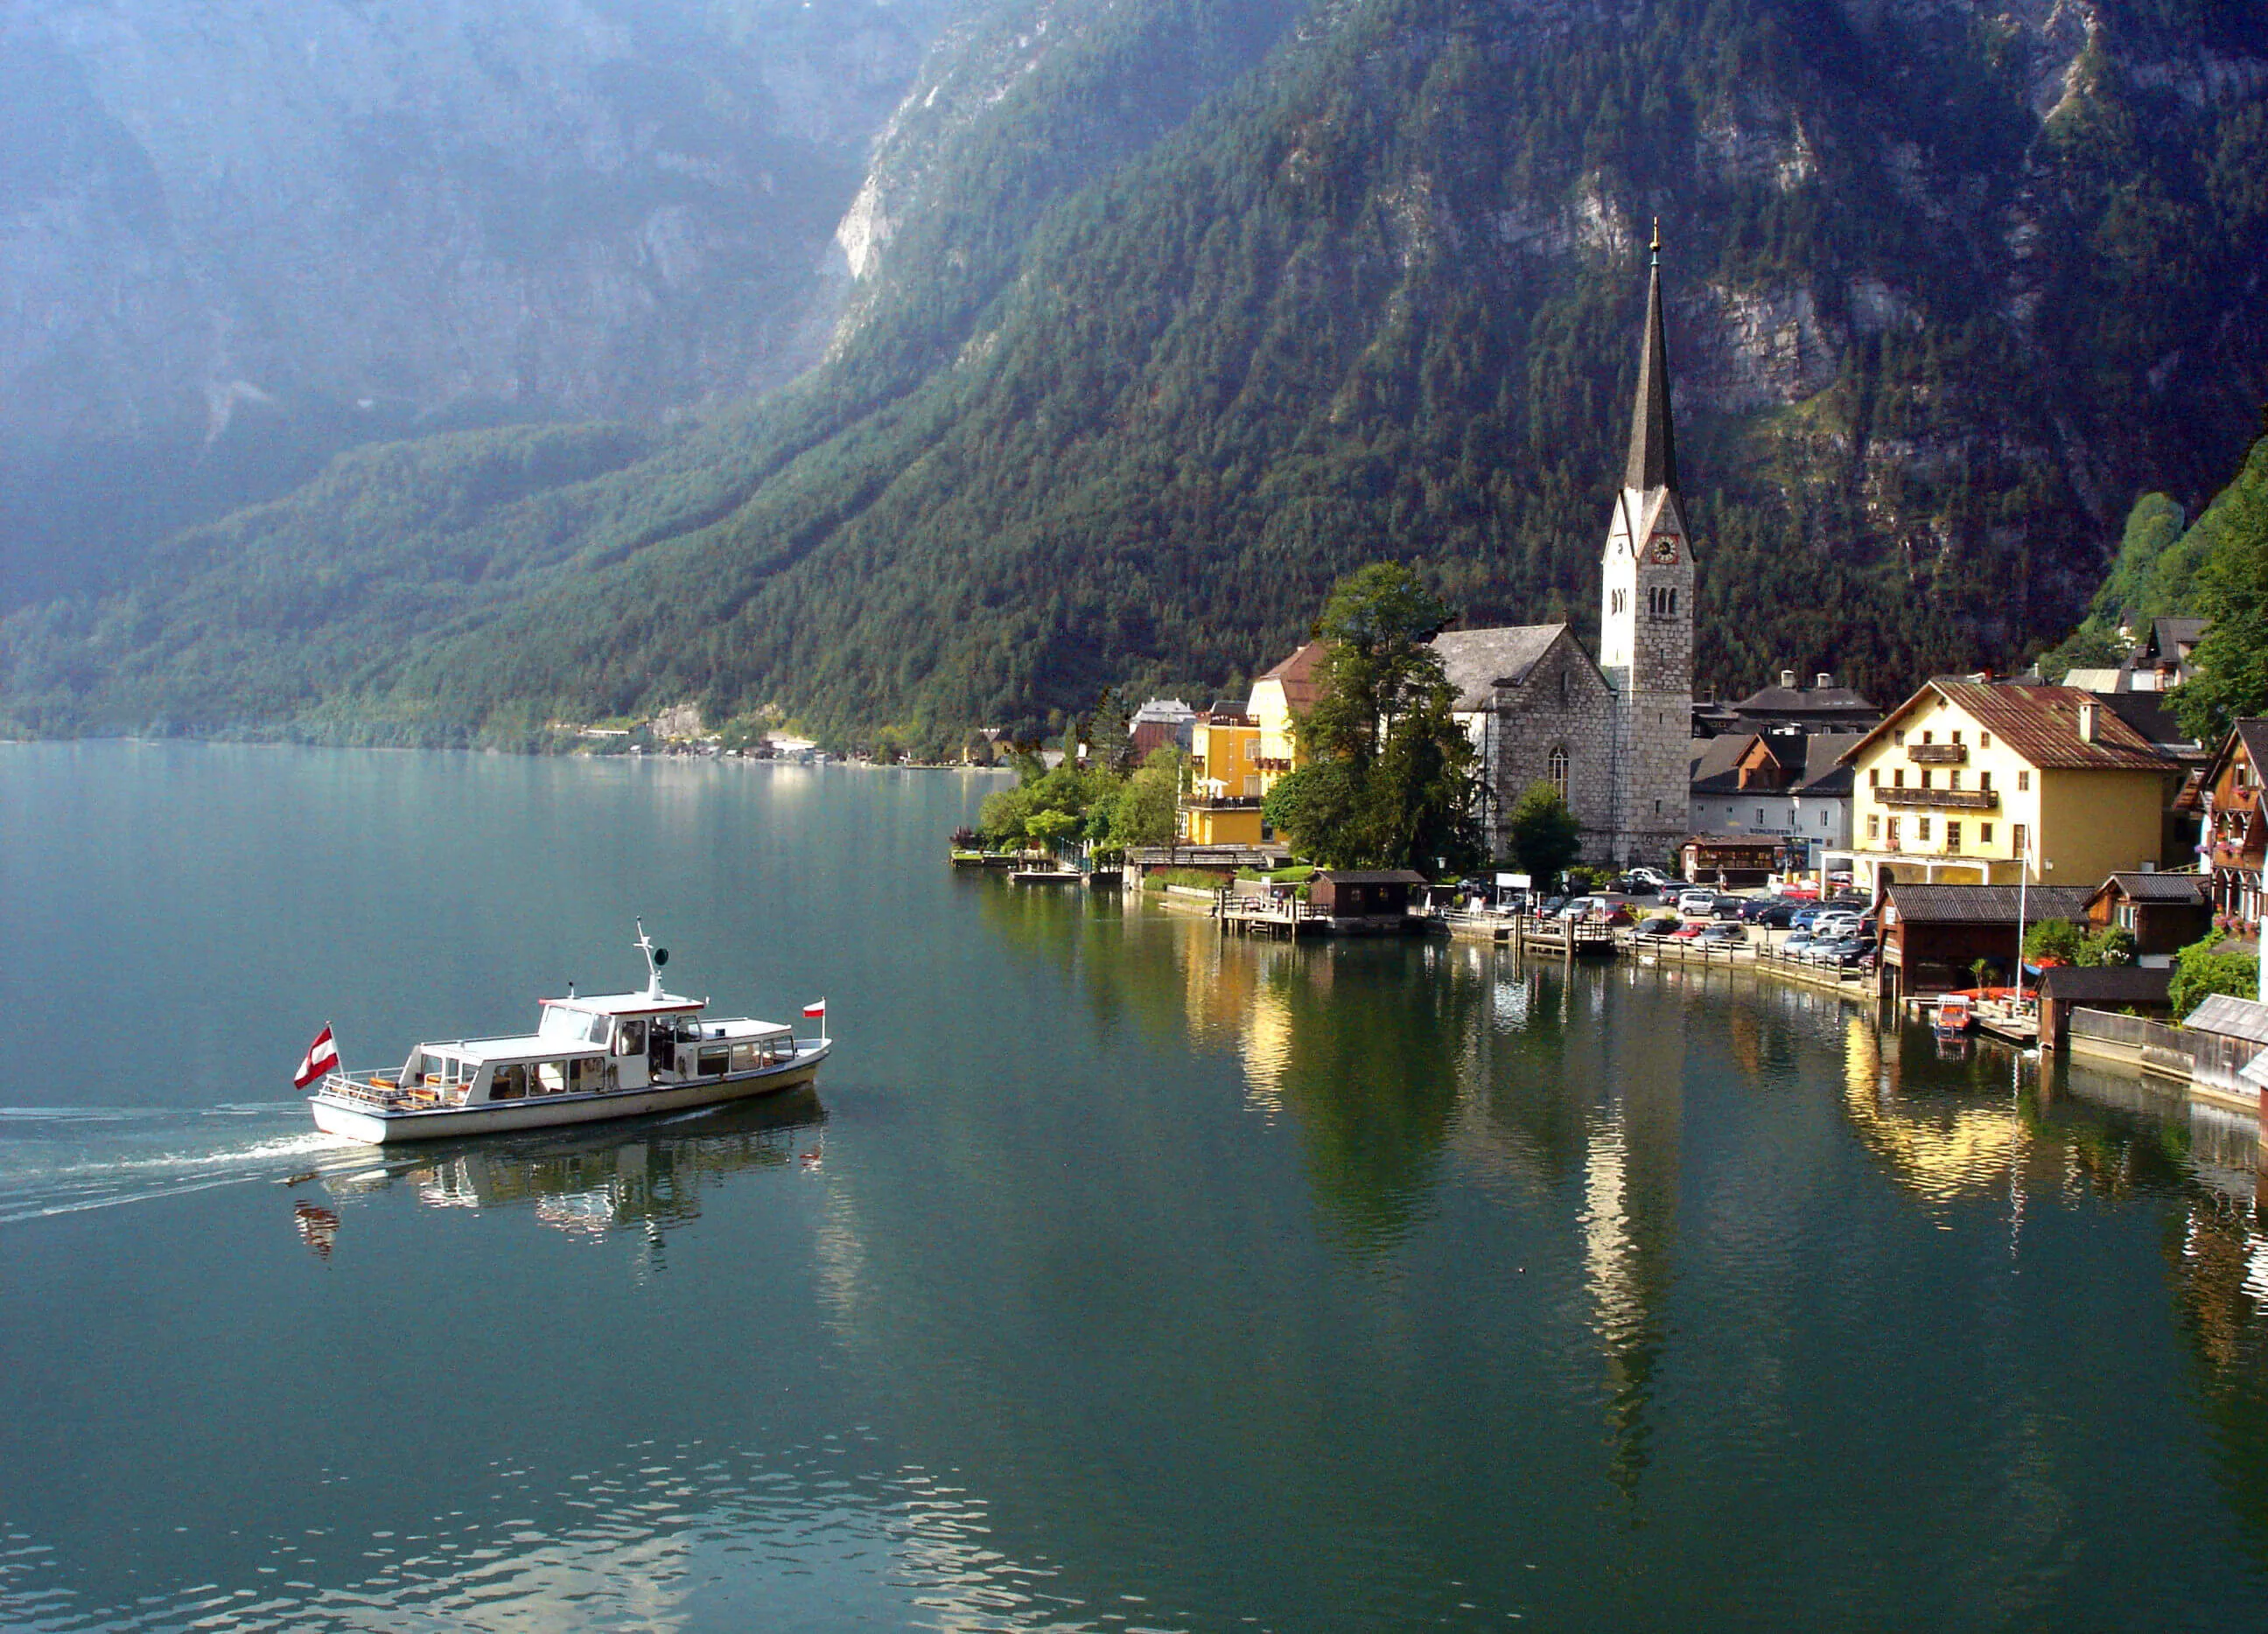 The lakeside hamlet of Hallstatt, in Austria's mountainous Salzkammergut, is a picture-perfect place for a honeymoon